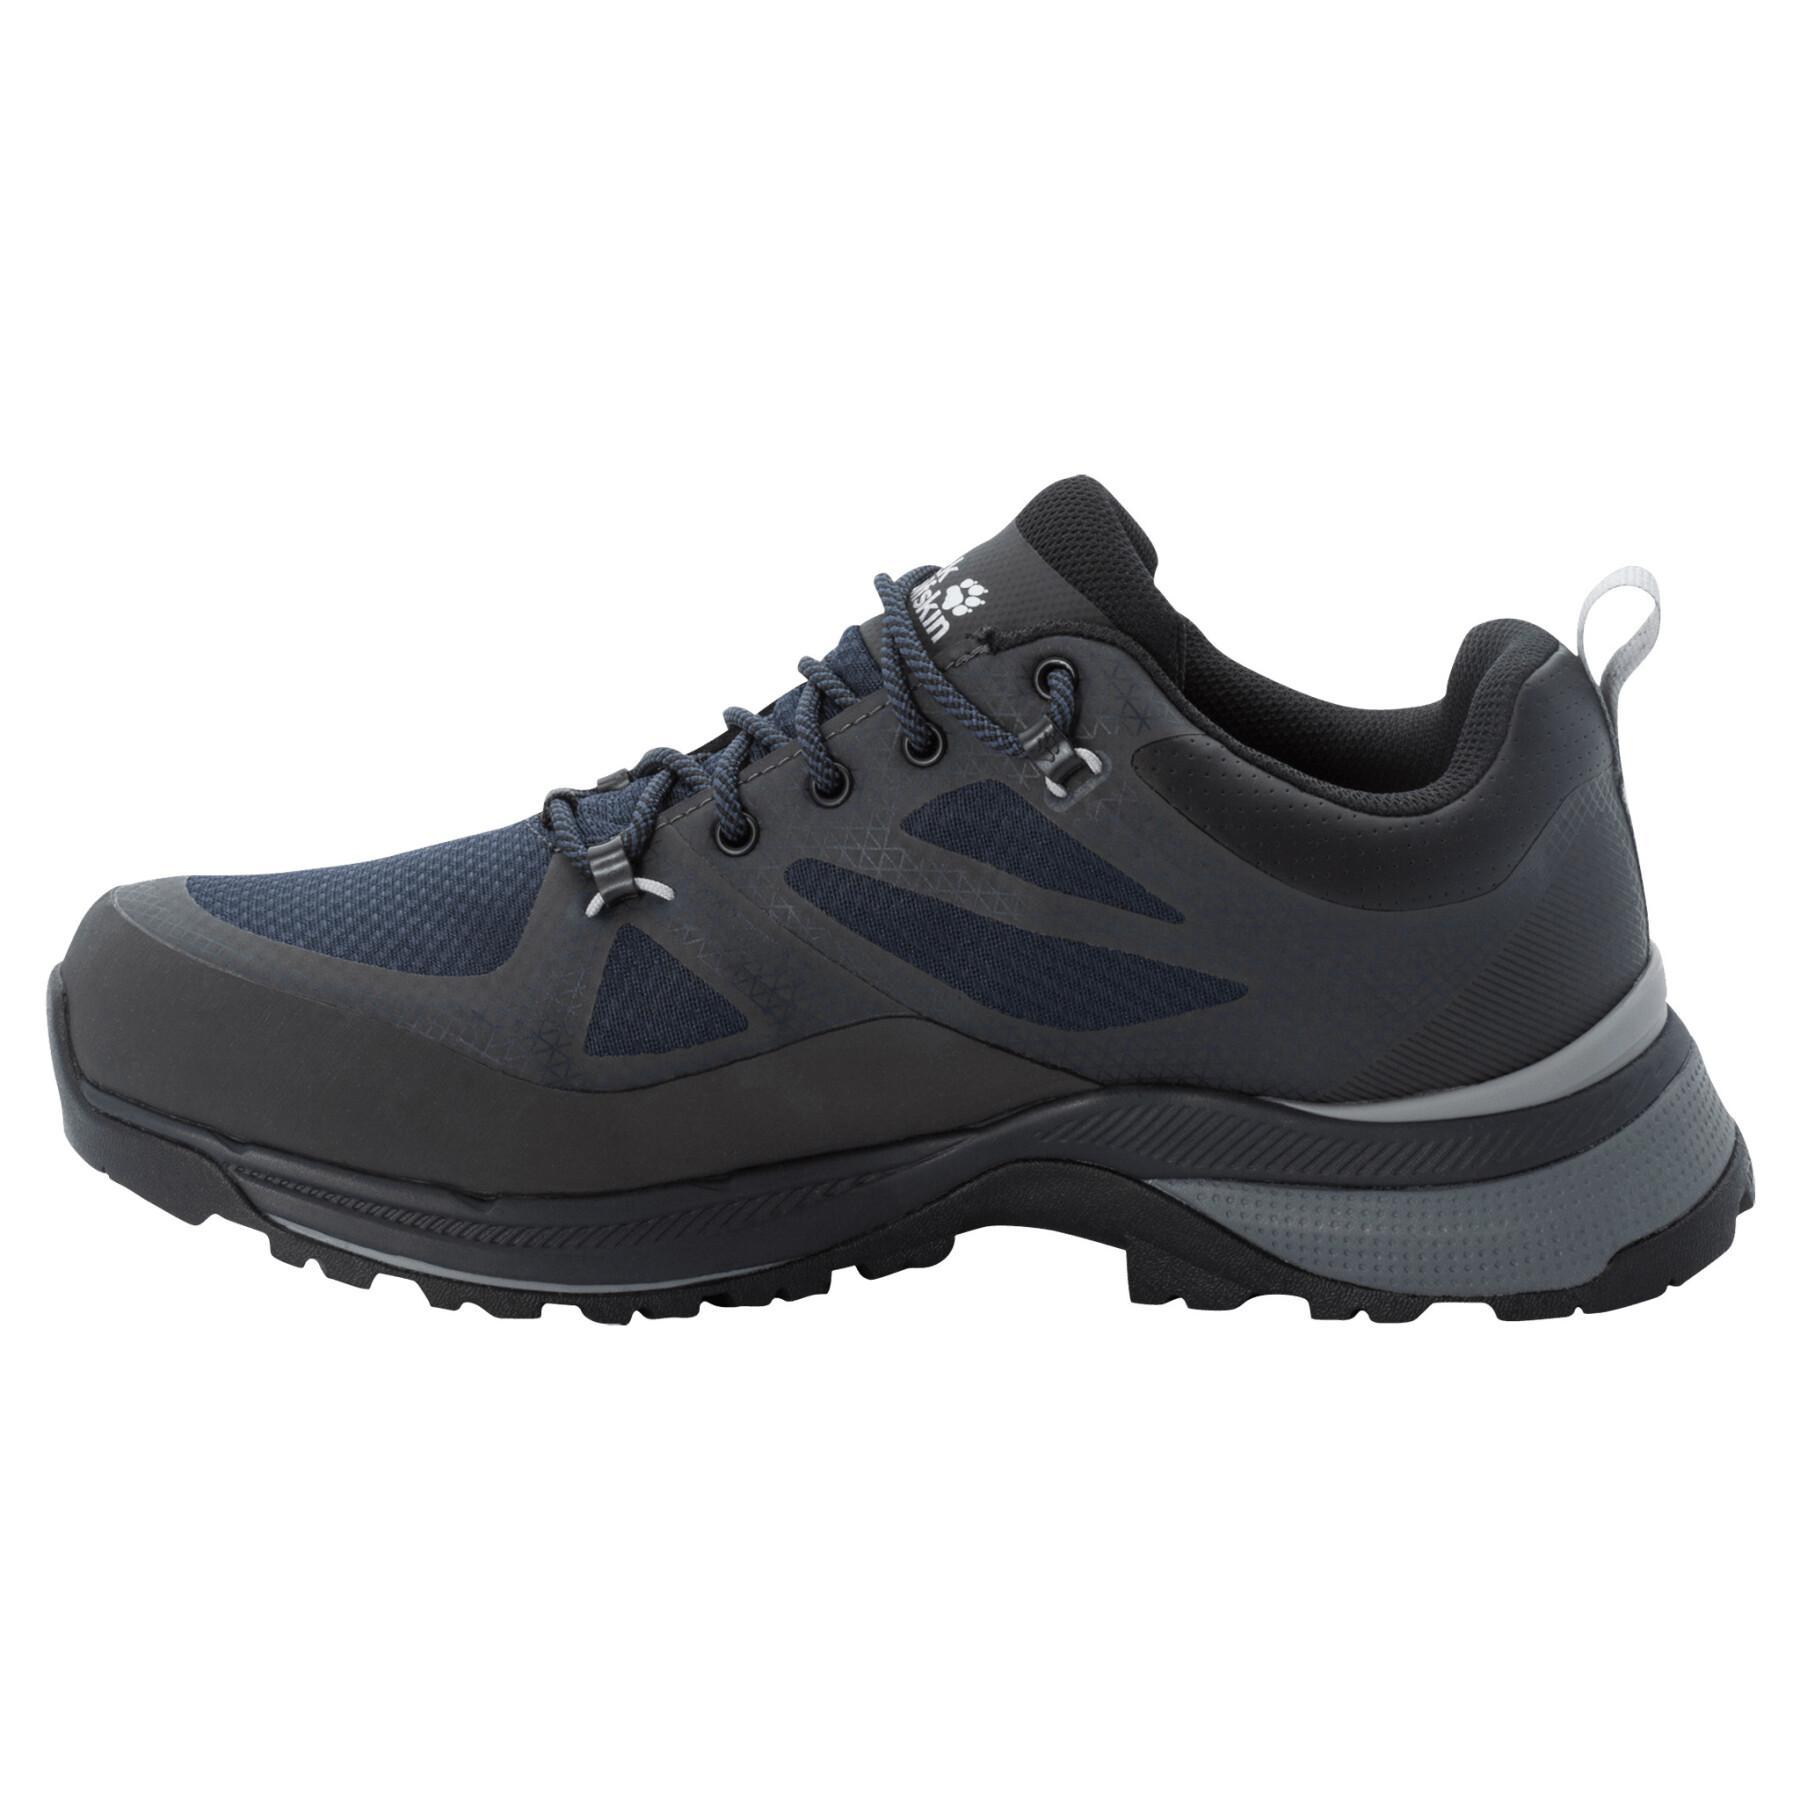 Hiking shoes Jack Wolfskin Force Striker Texapore GT